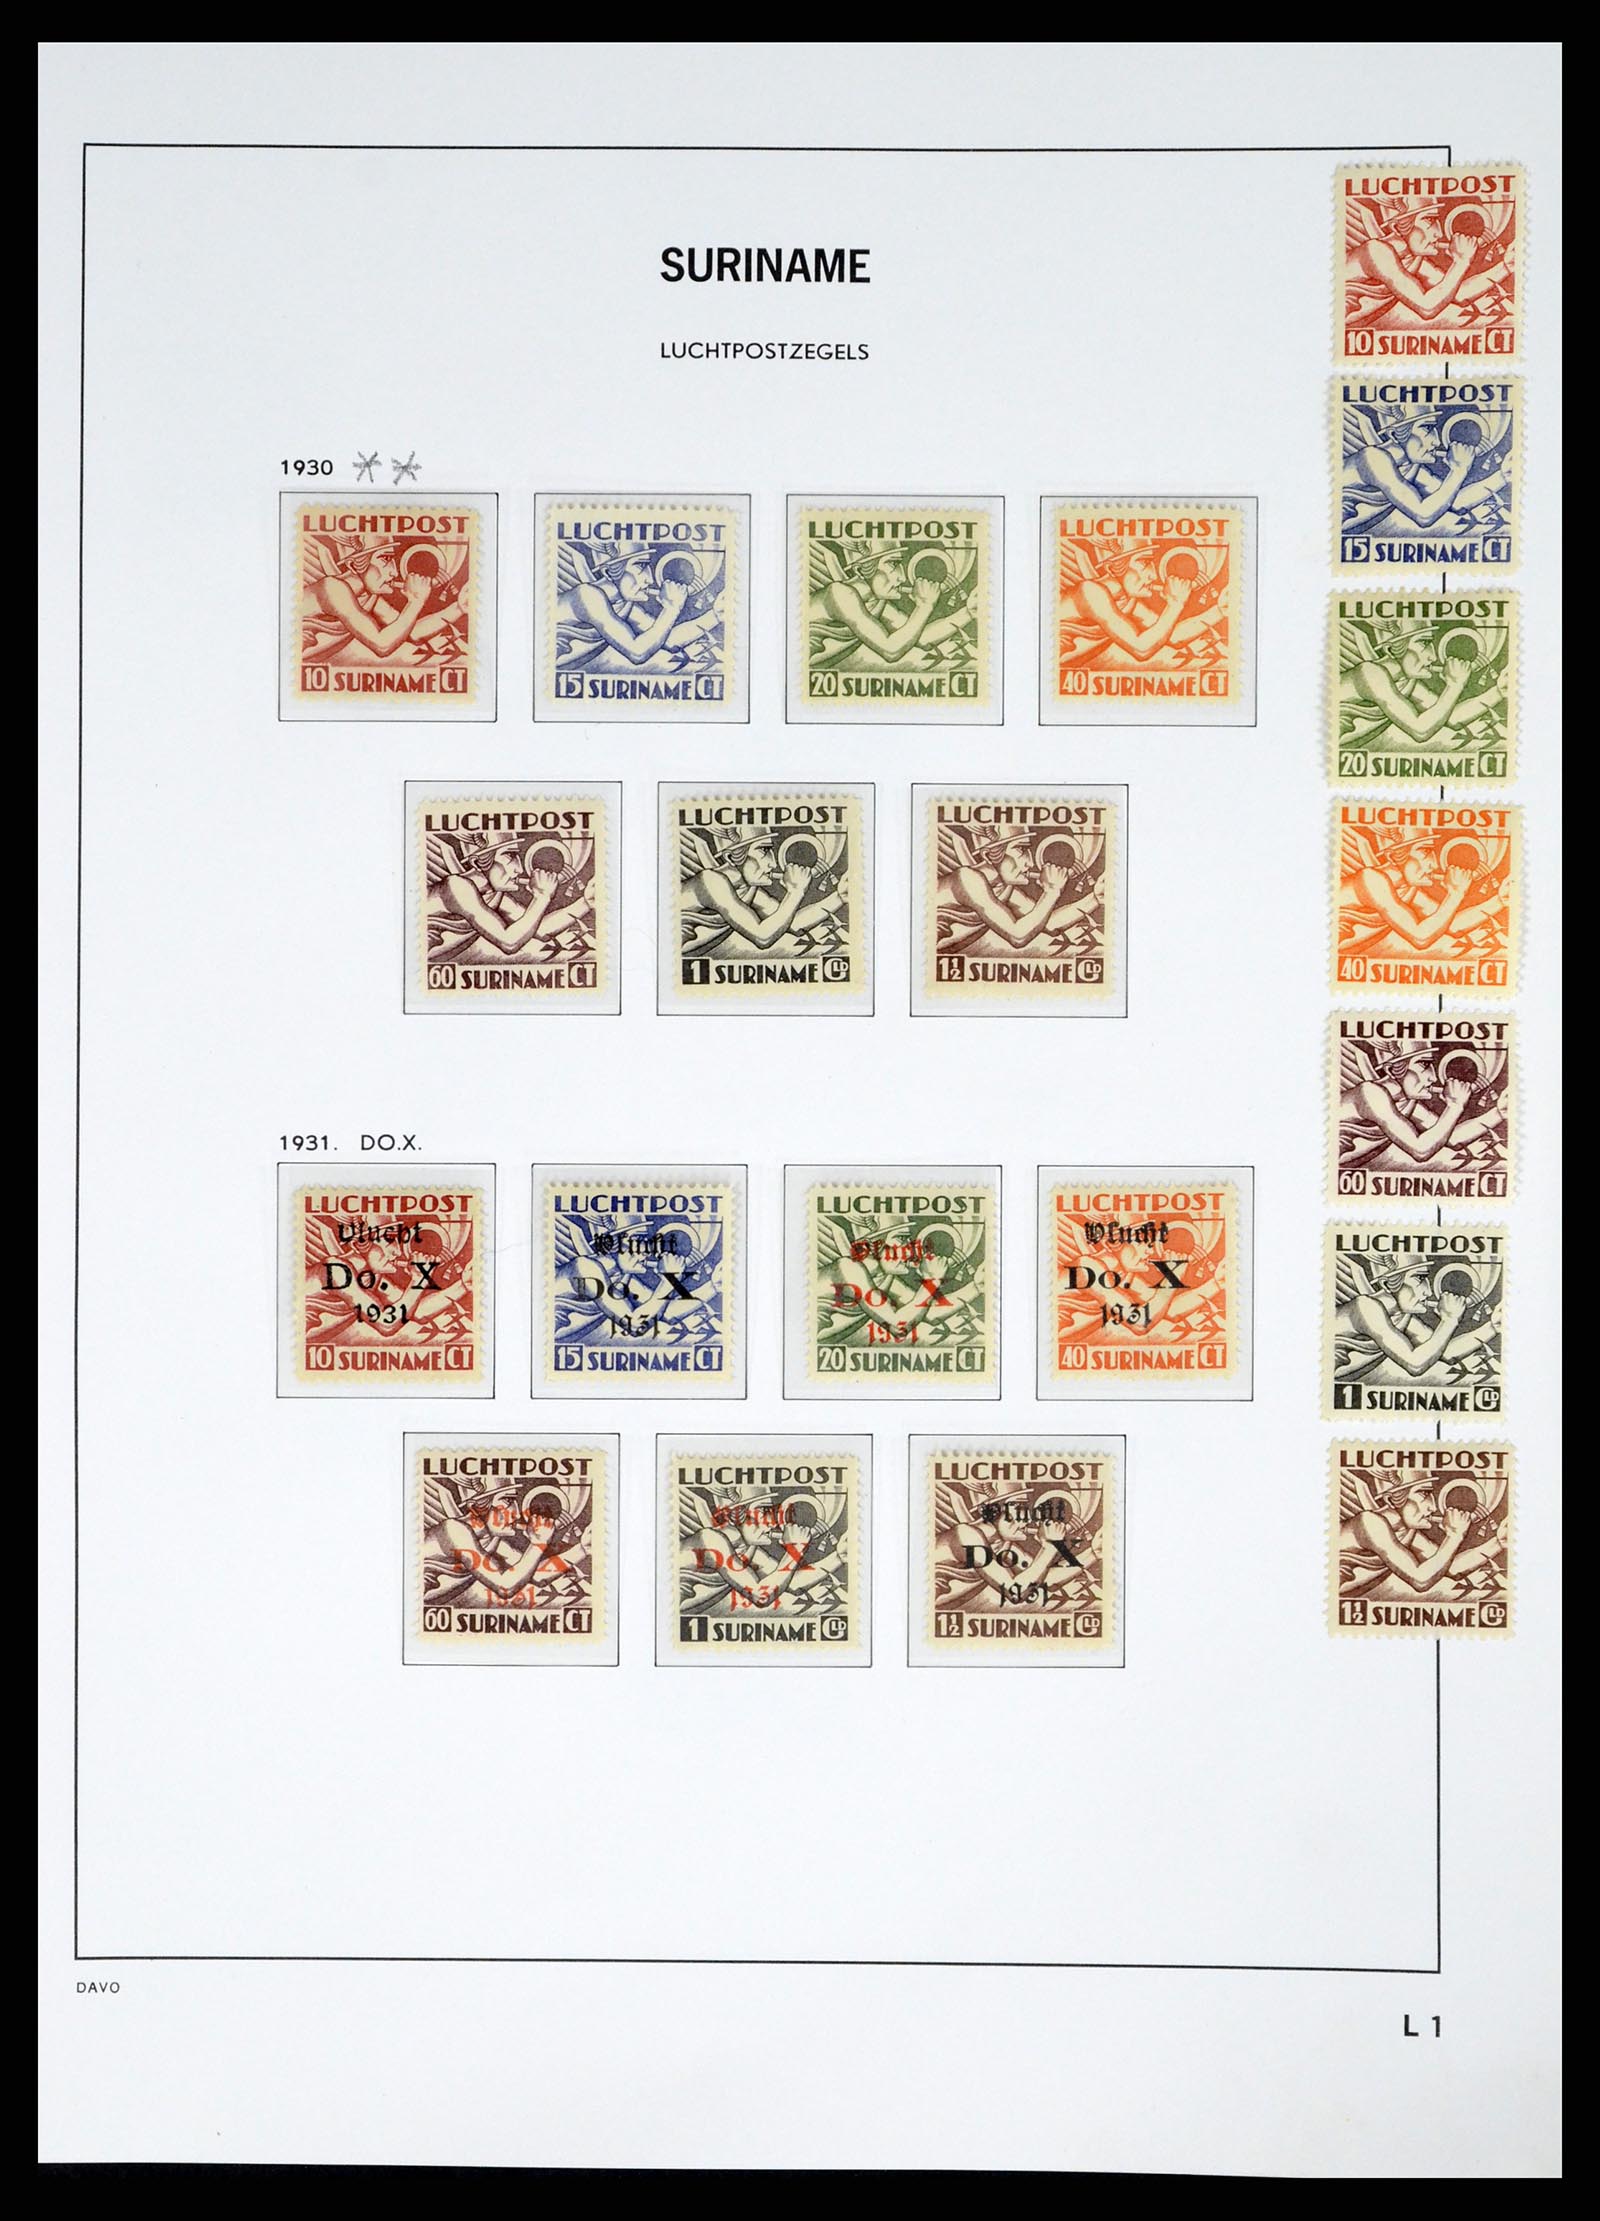 37421 068 - Stamp collection 37421 Suriname 1873-1975.